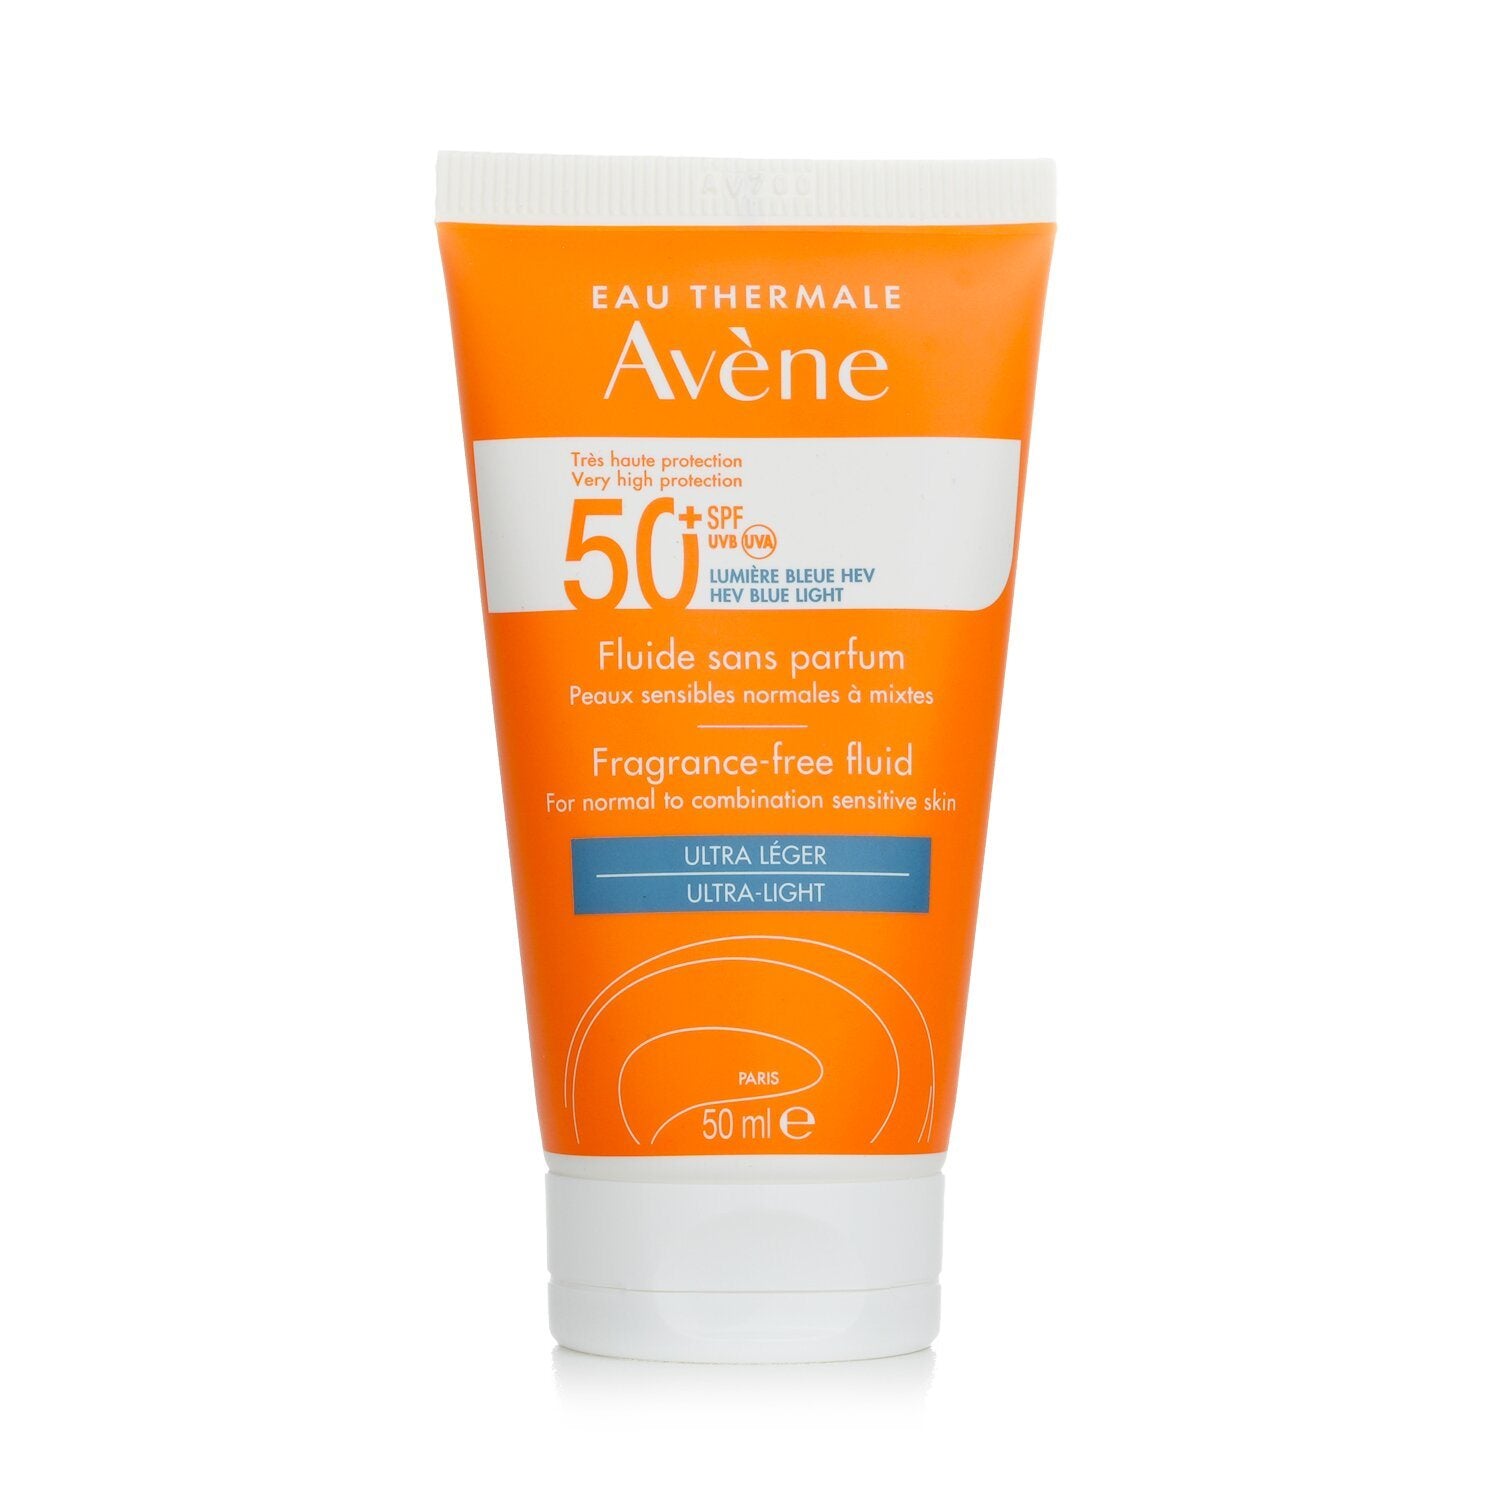 AVENE - Very High Protection Fragrance-Free Fluid SPF50+ - For Normal to Combination Sensitive Skin 149128 50ml/1.7oz.